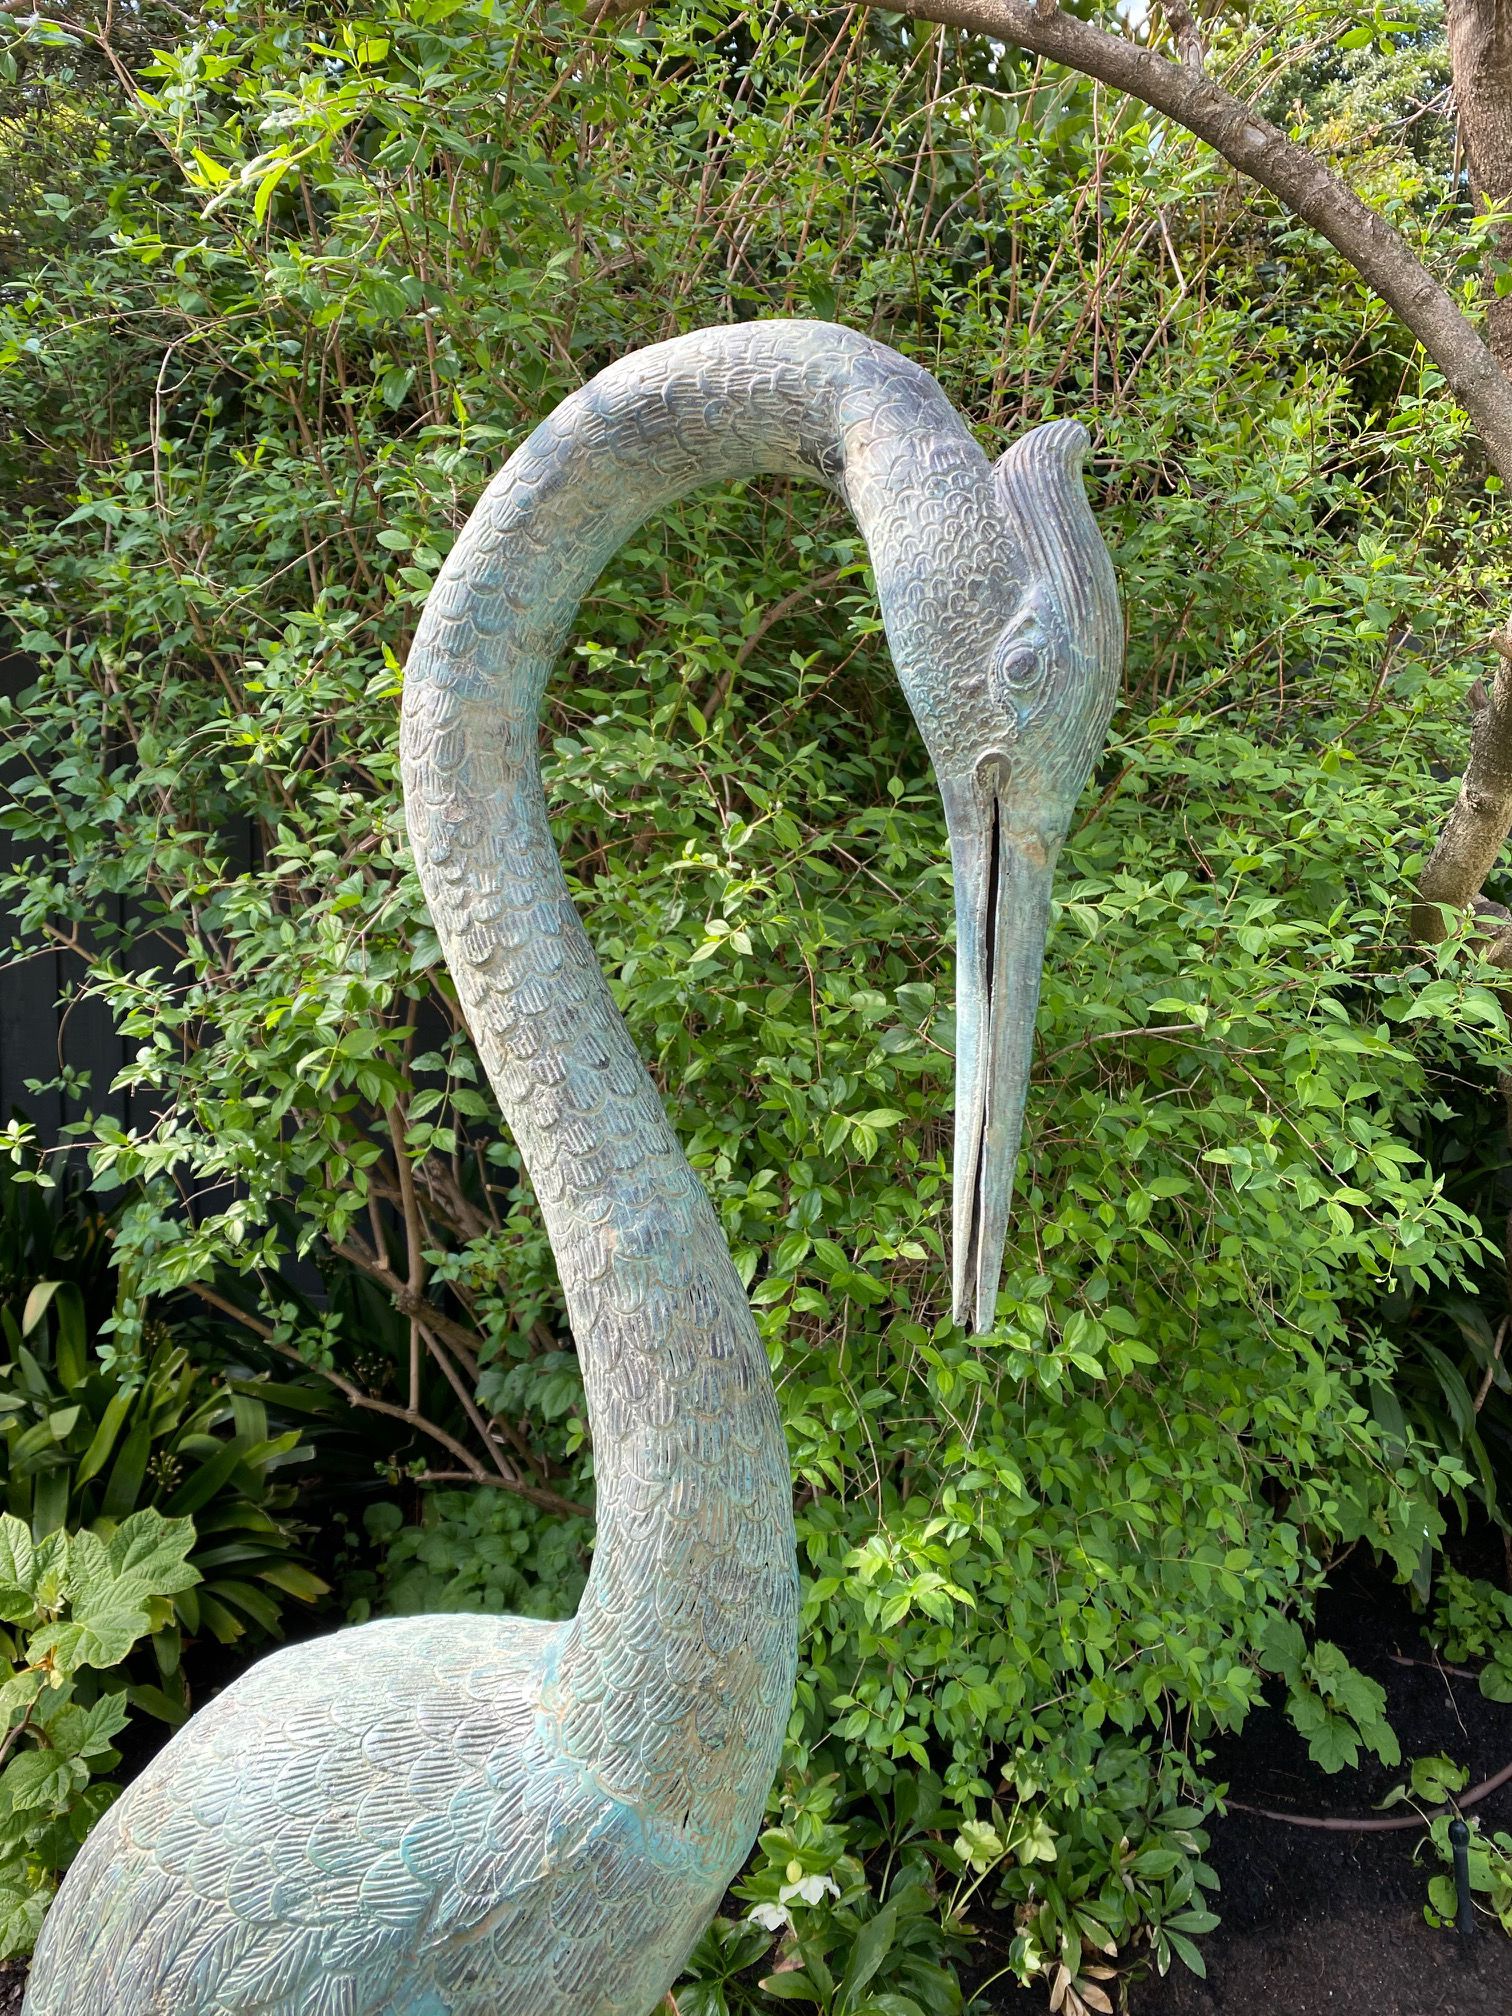 SOLD A beautiful pair of large bronze water birds with verdigris finish, in the Japanese style